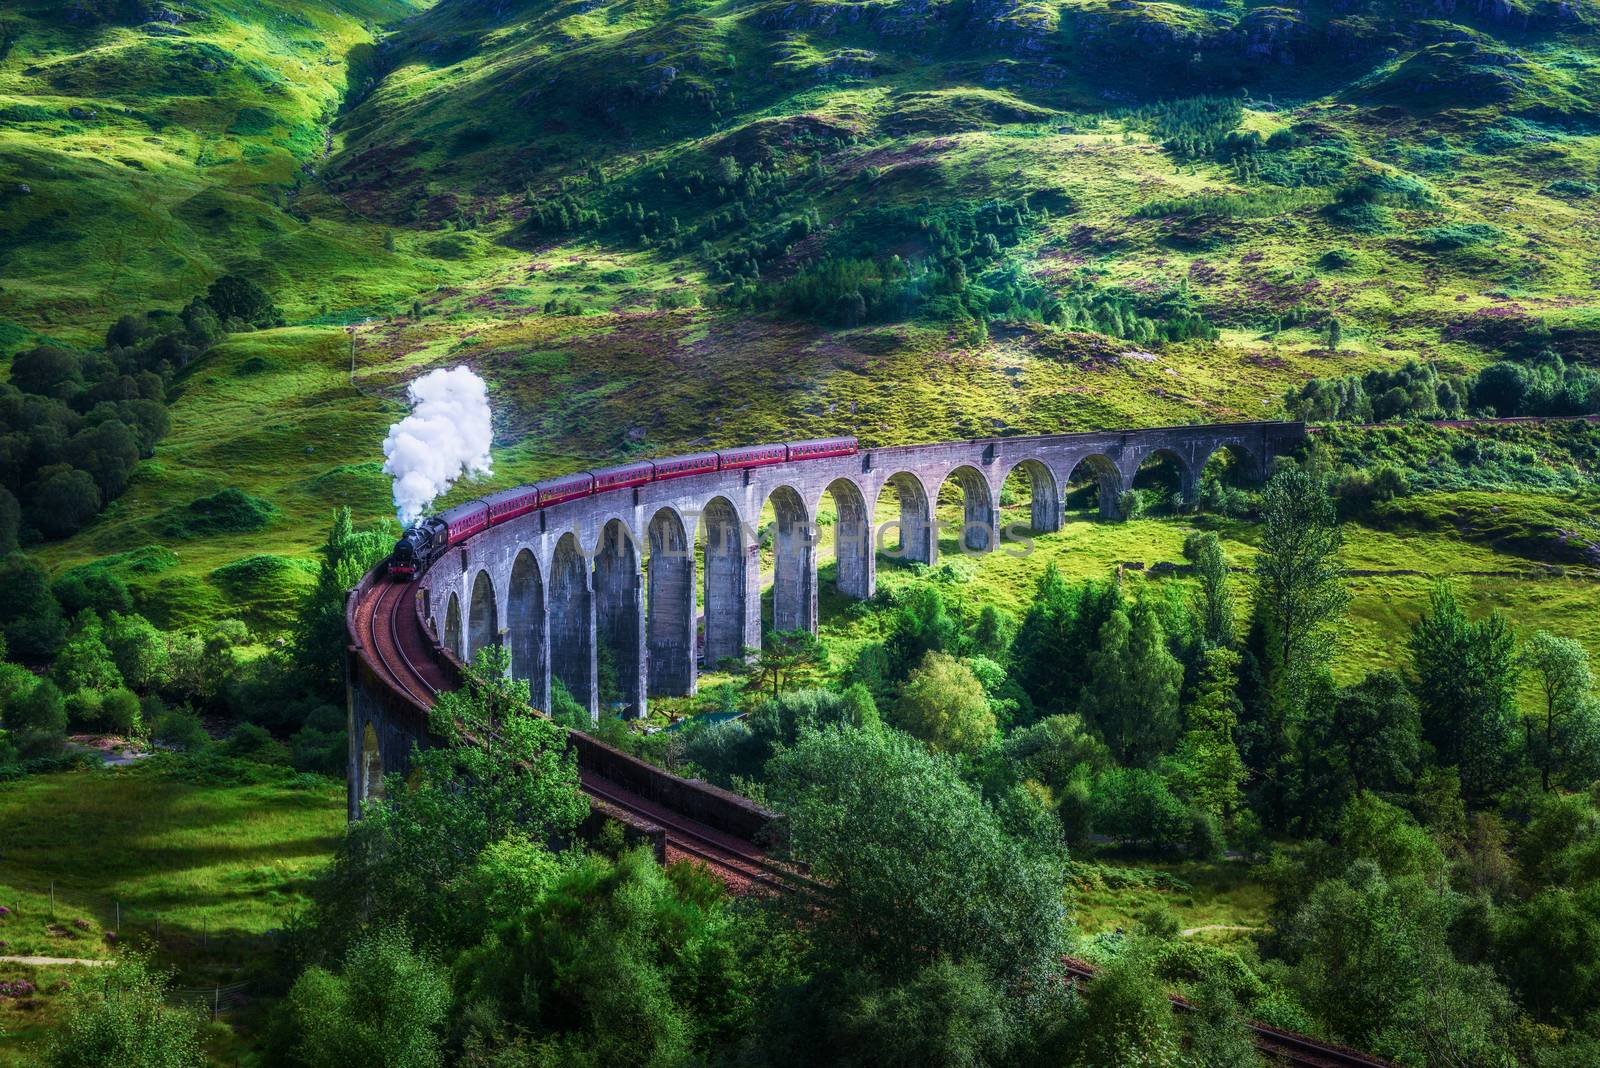 Glenfinnan Railway Viaduct in Scotland with the Jacobite steam train passing over. Artistic vintage style processing.